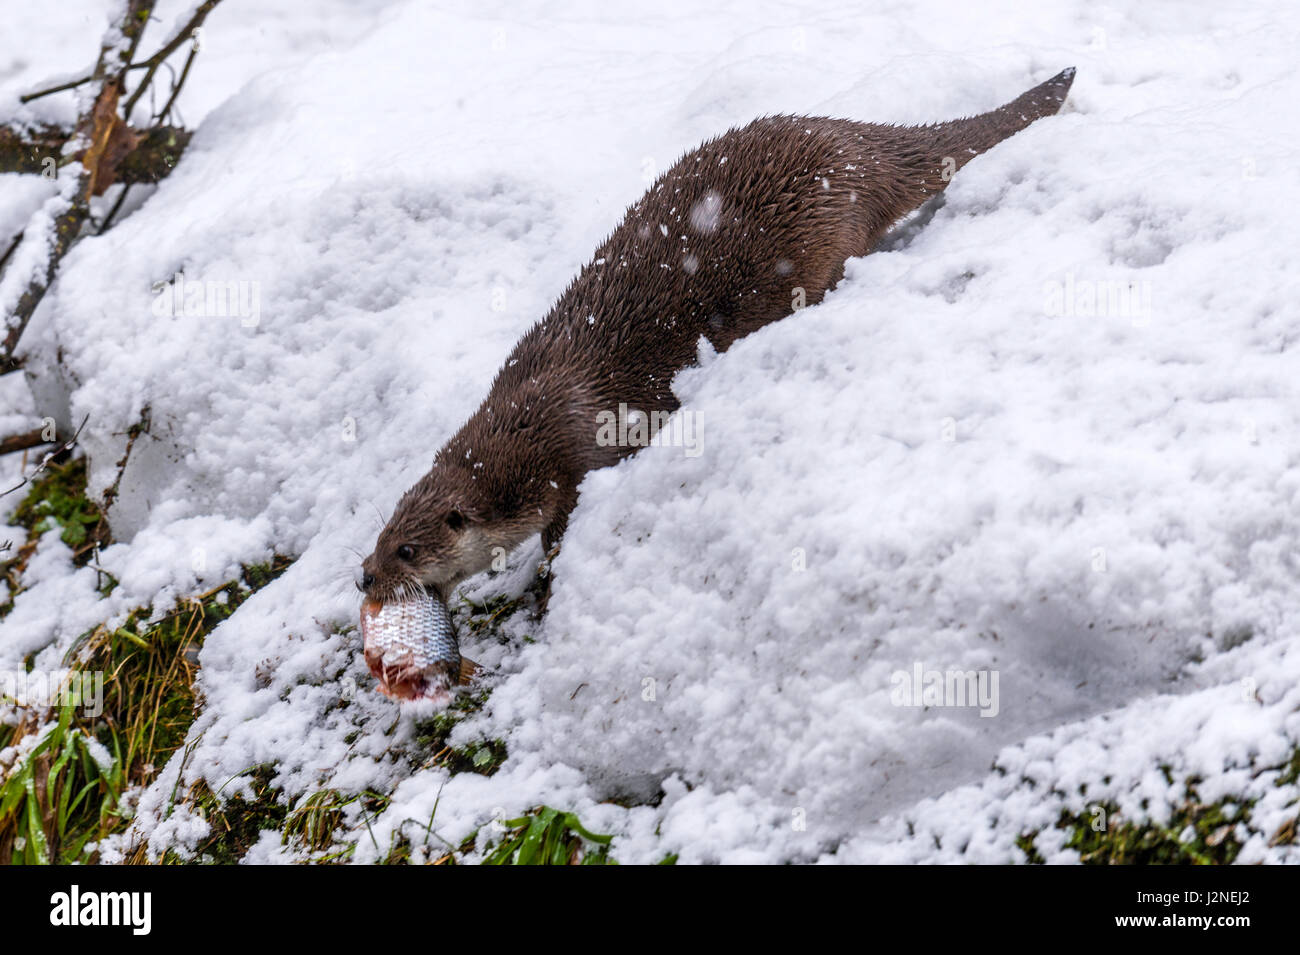 Beautiful Eurasian Otter (Lutra lutra) depicted carrying fish bait in its mouth in a winter snow drift. Stock Photo